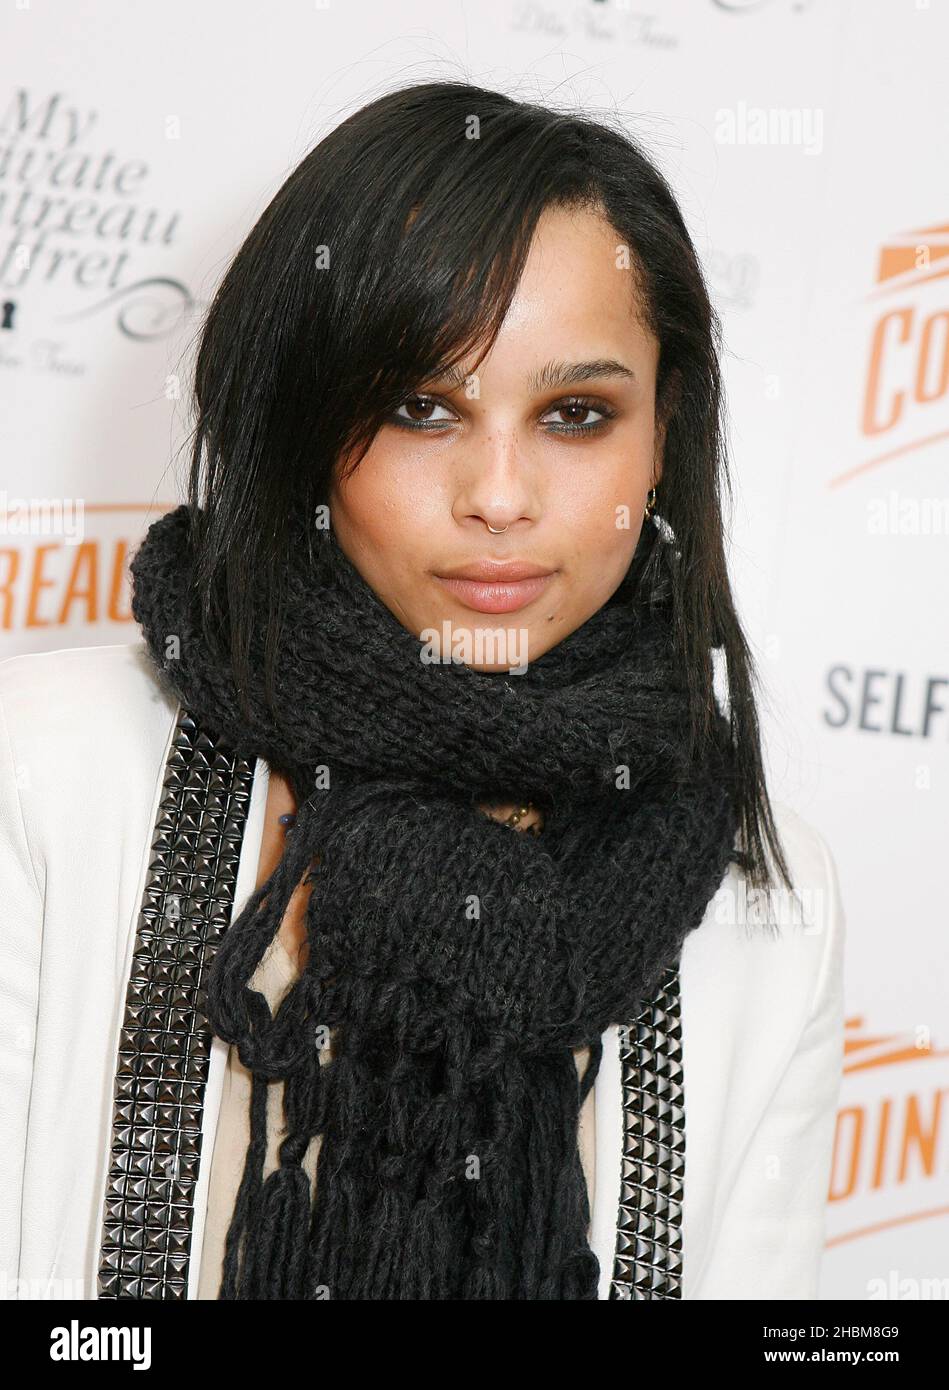 Zoe Kravitz attends the Dita Von Teese 'My Private Cointreau Coffret' at Selfridges Personal Shopping Store in Oxford Street, London. Stock Photo